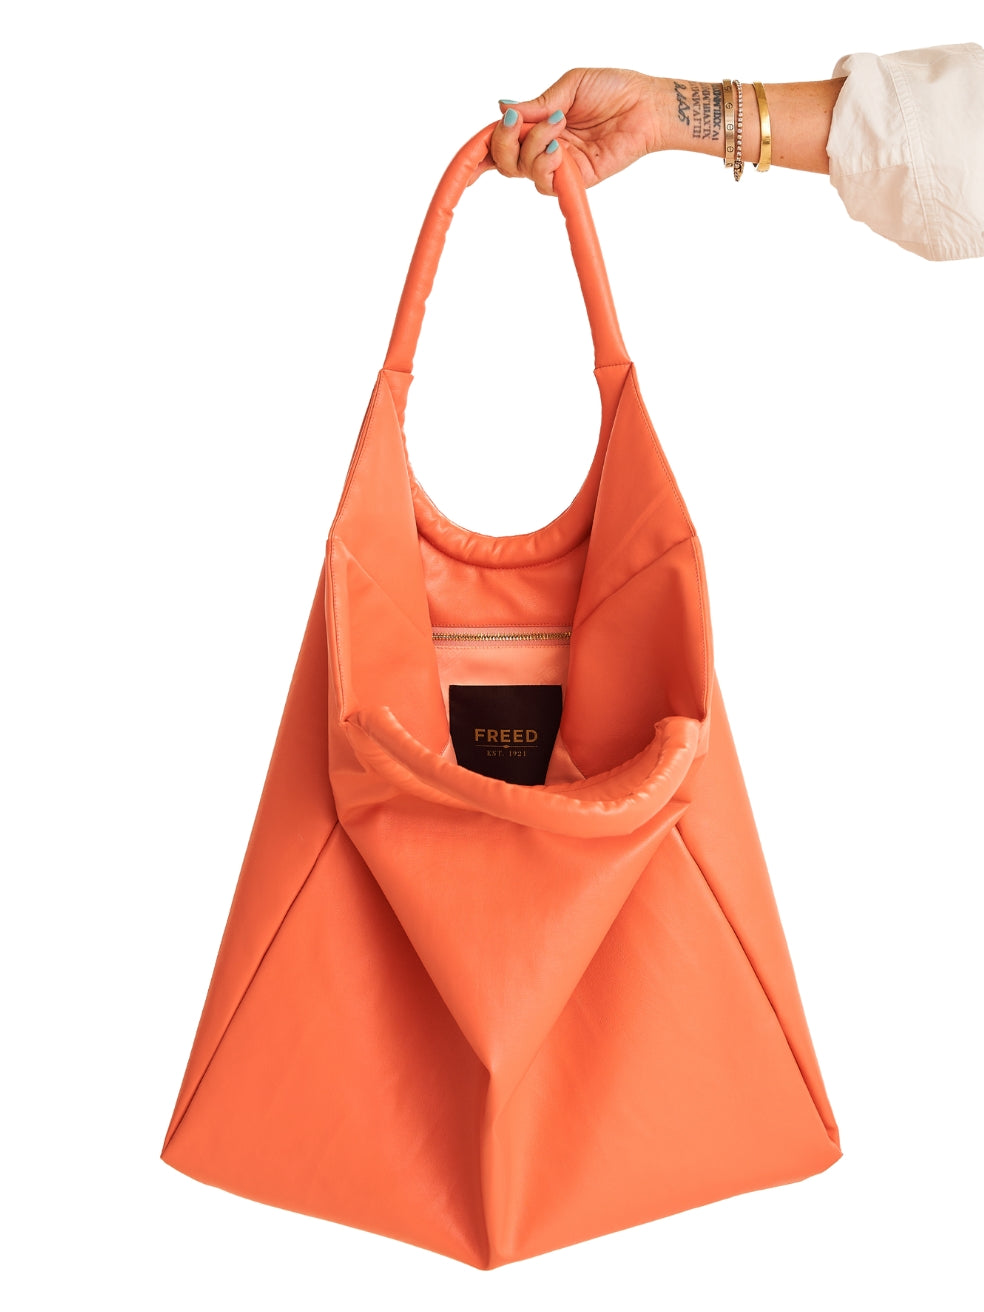 24 hour oversized tote animal free leather peach made in canada